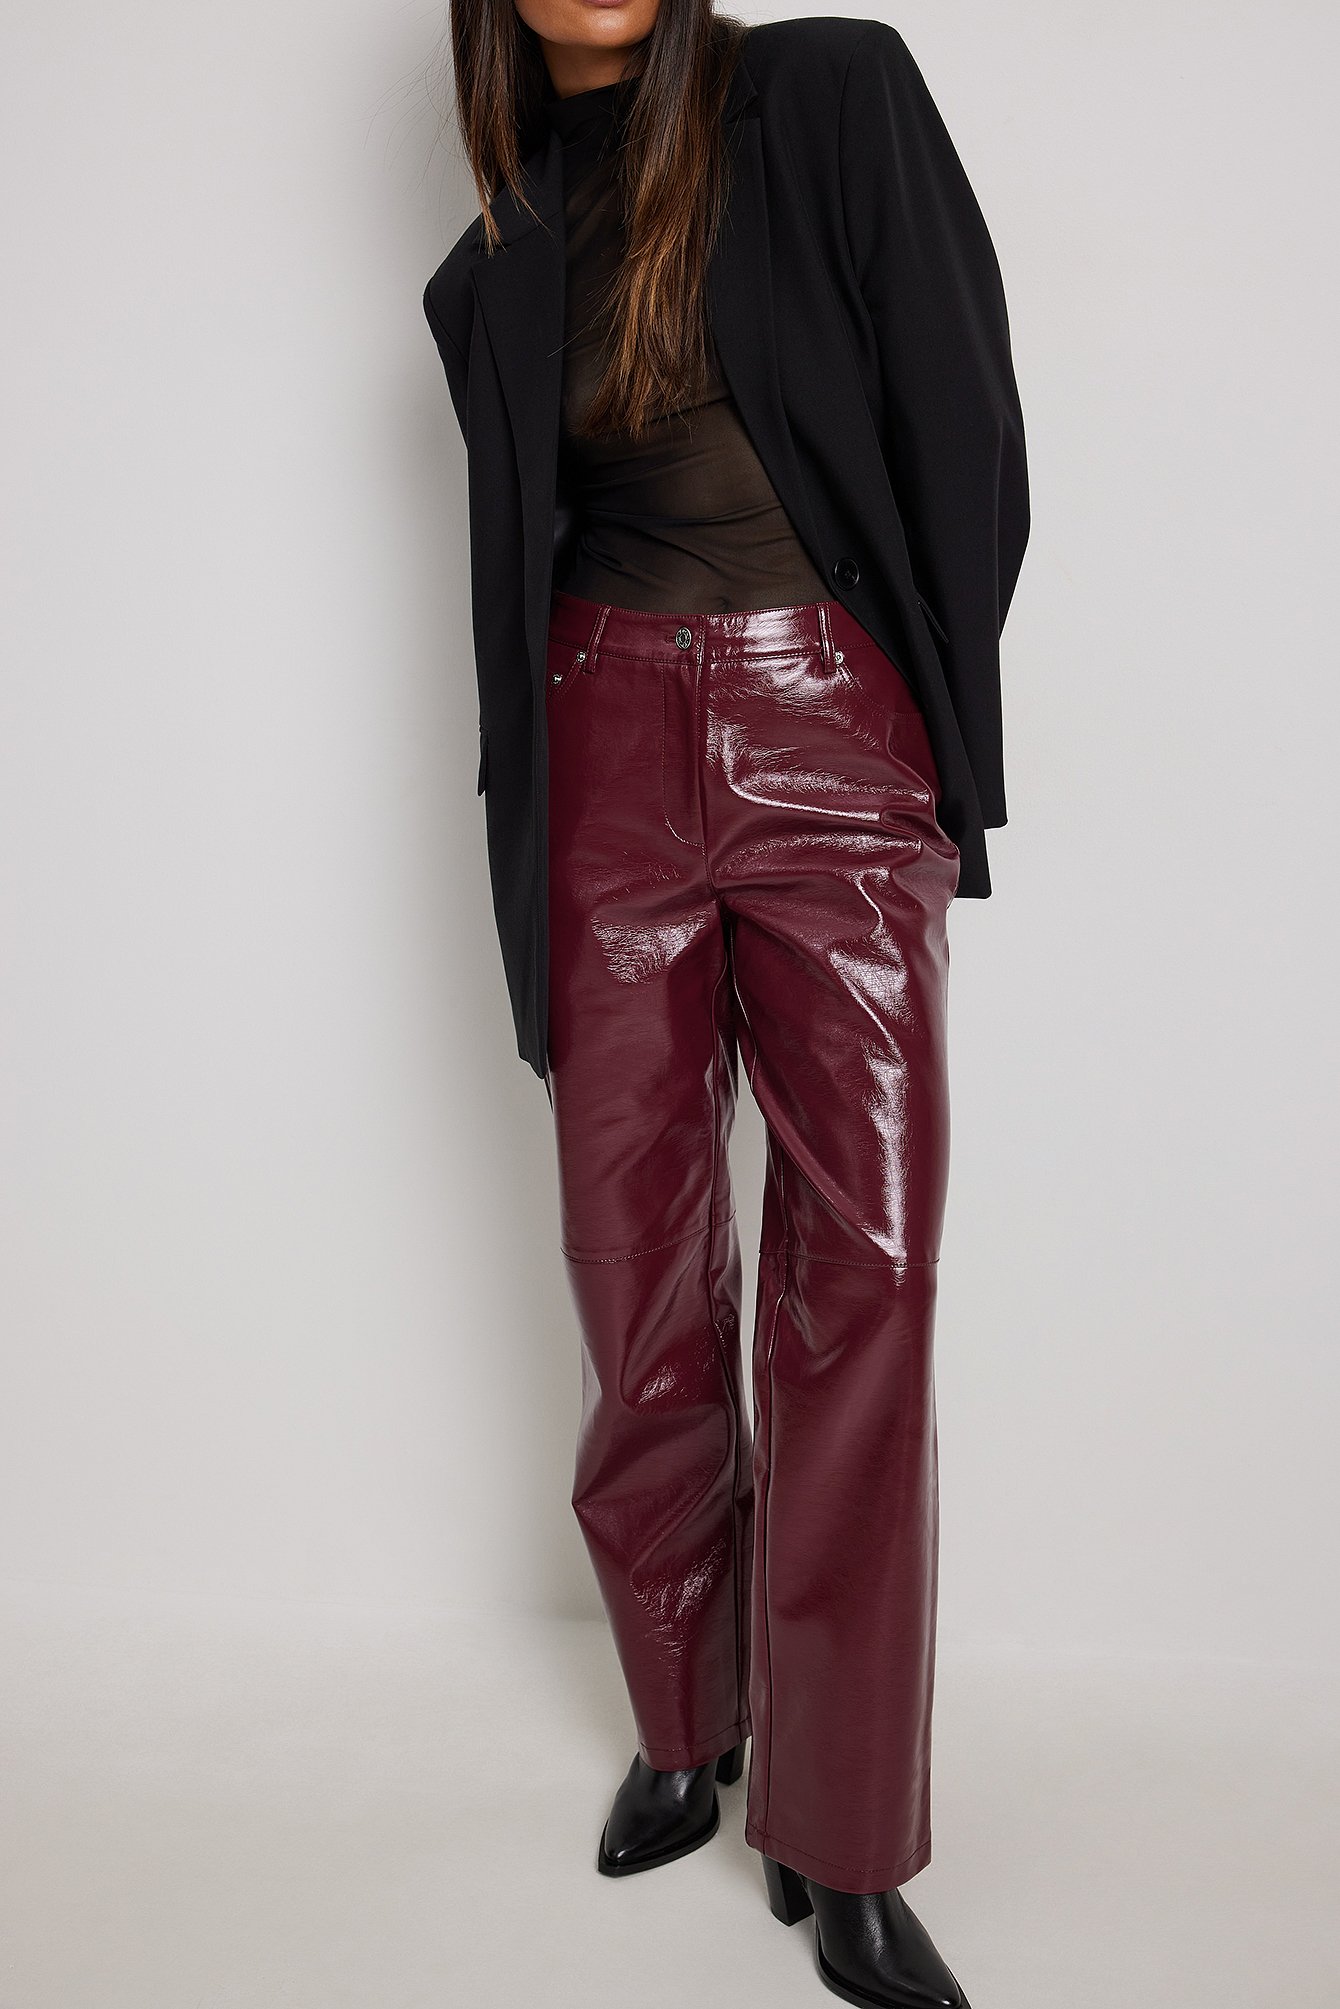 fake leather trousers uk